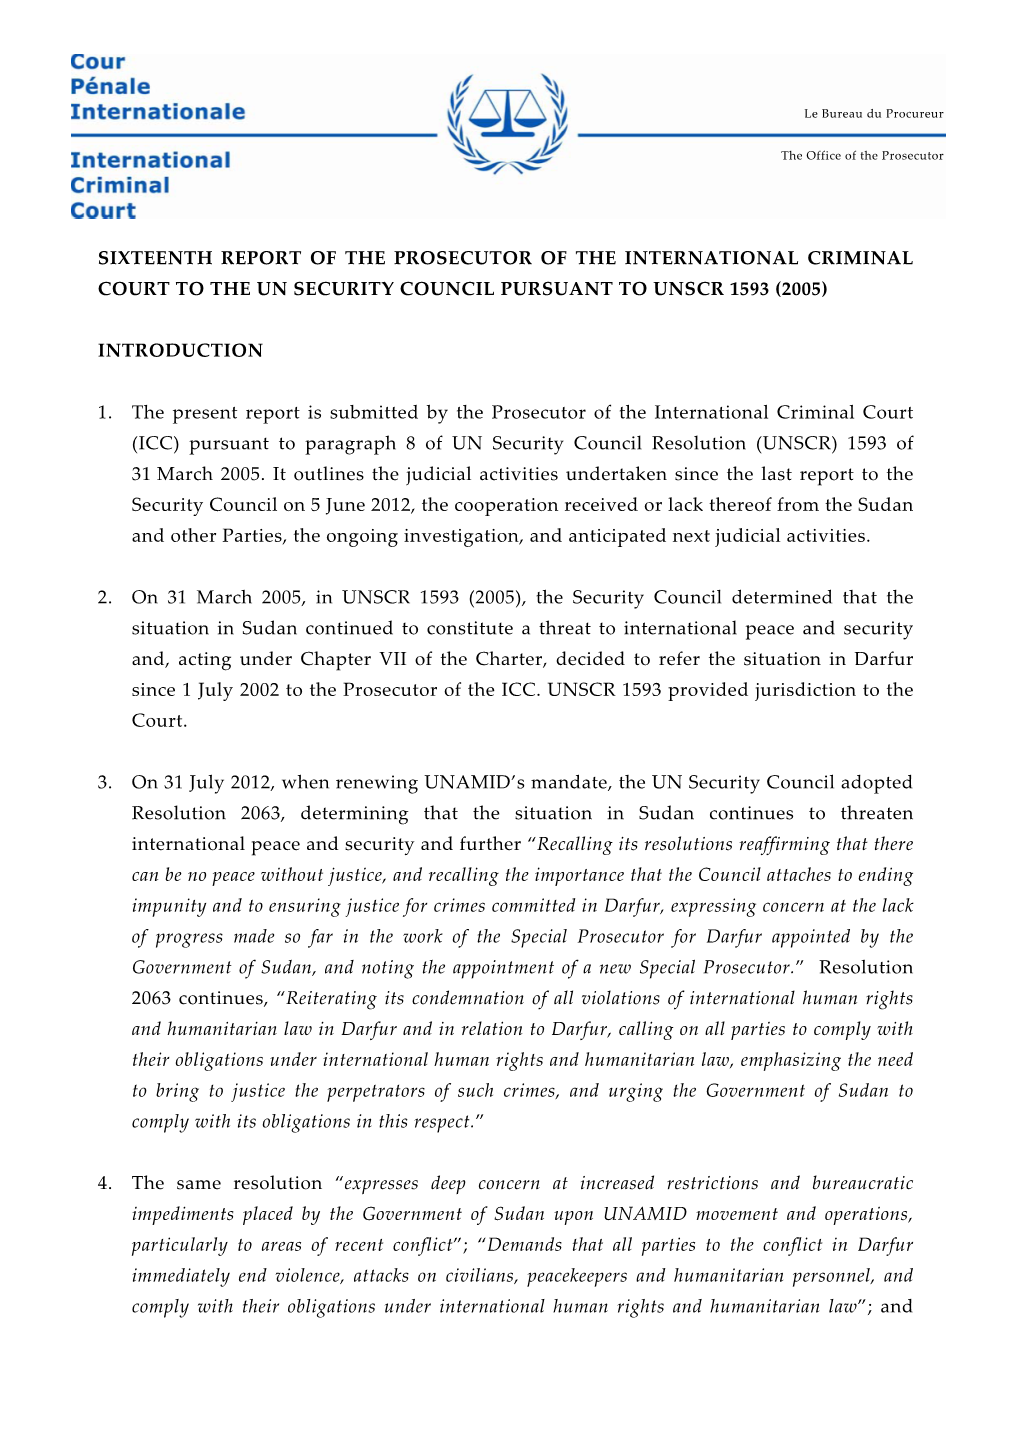 Sixteenth Report of the Prosecutor of the International Criminal Court to the Un Security Council Pursuant to Unscr 1593 (2005)